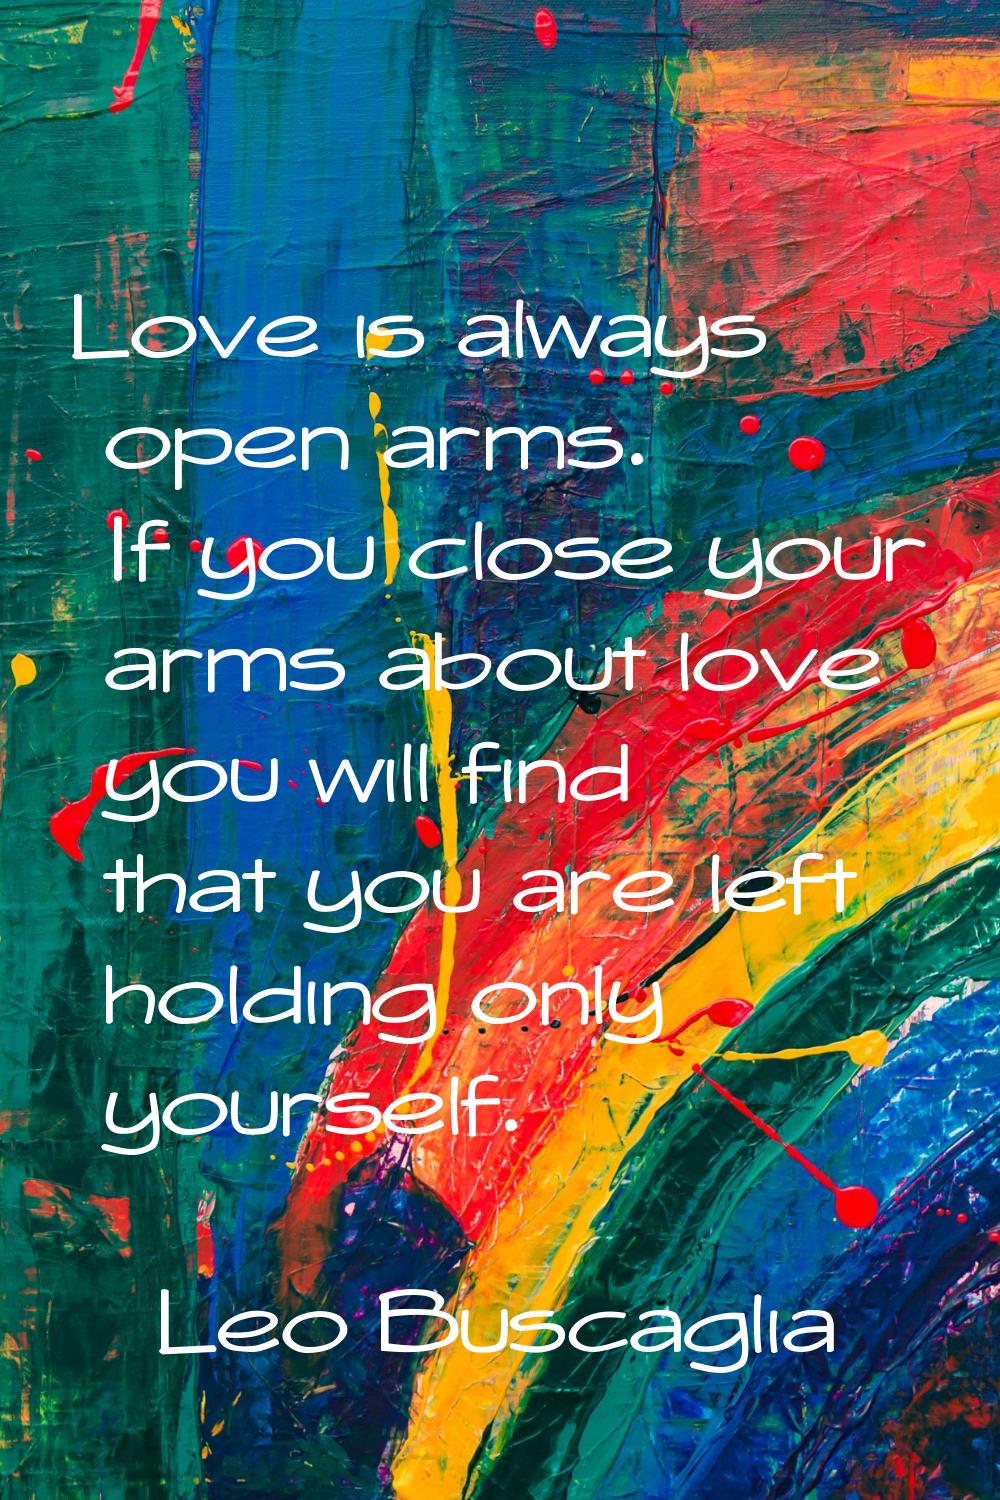 Love is always open arms. If you close your arms about love you will find that you are left holding